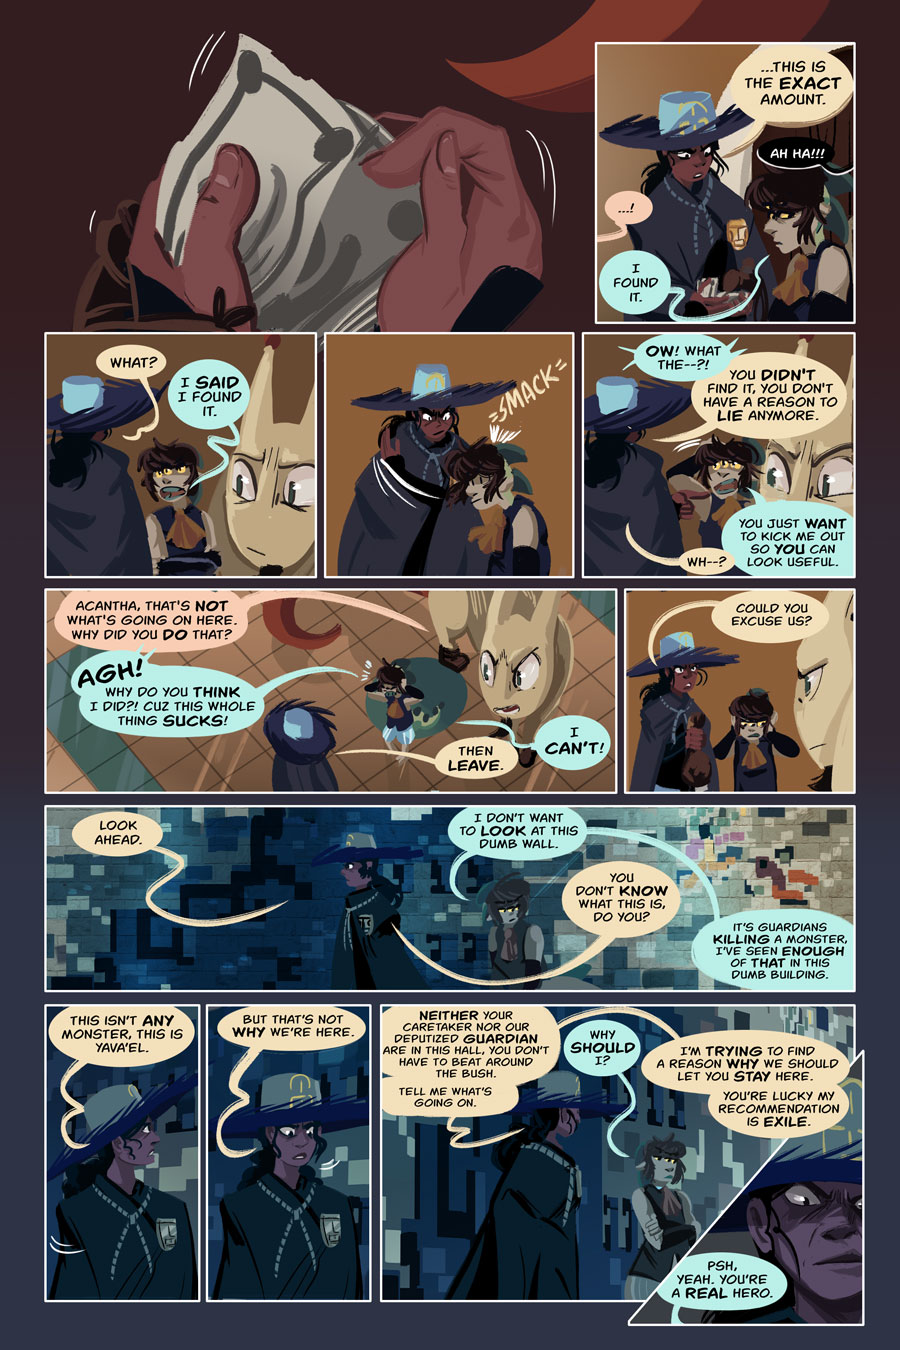 Chapter 8, page 36